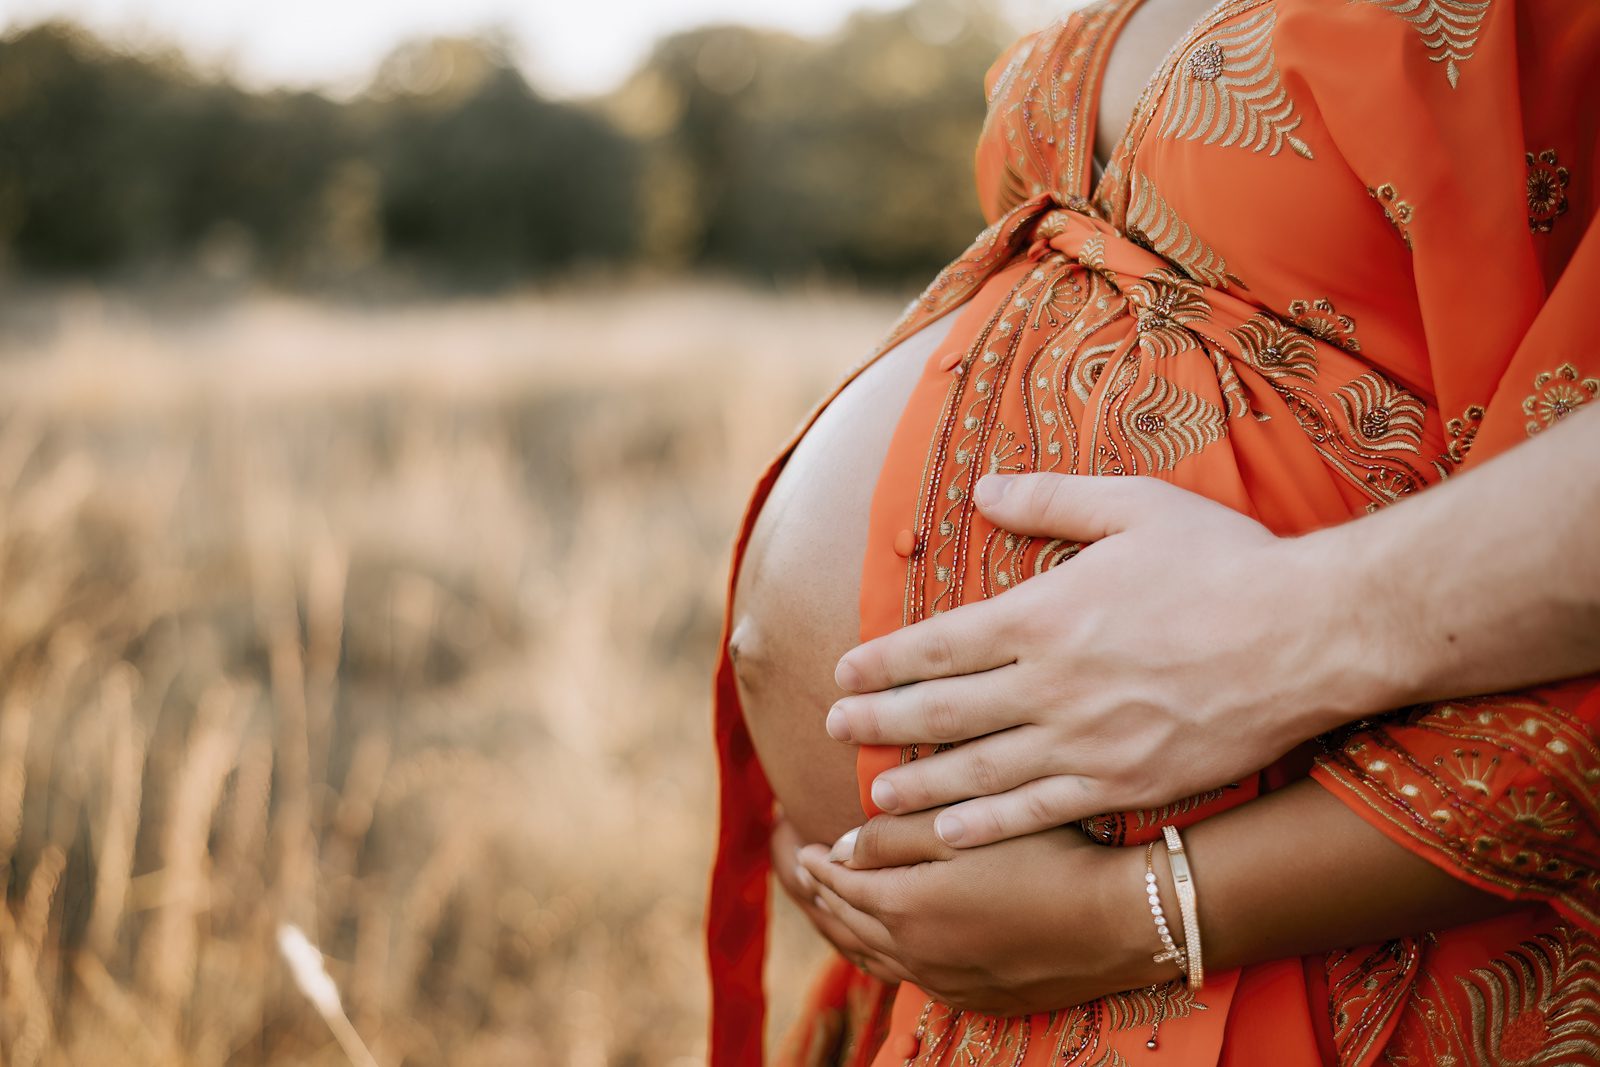 A pregnant woman holding her husband's hand in a field during outdoor maternity photography.